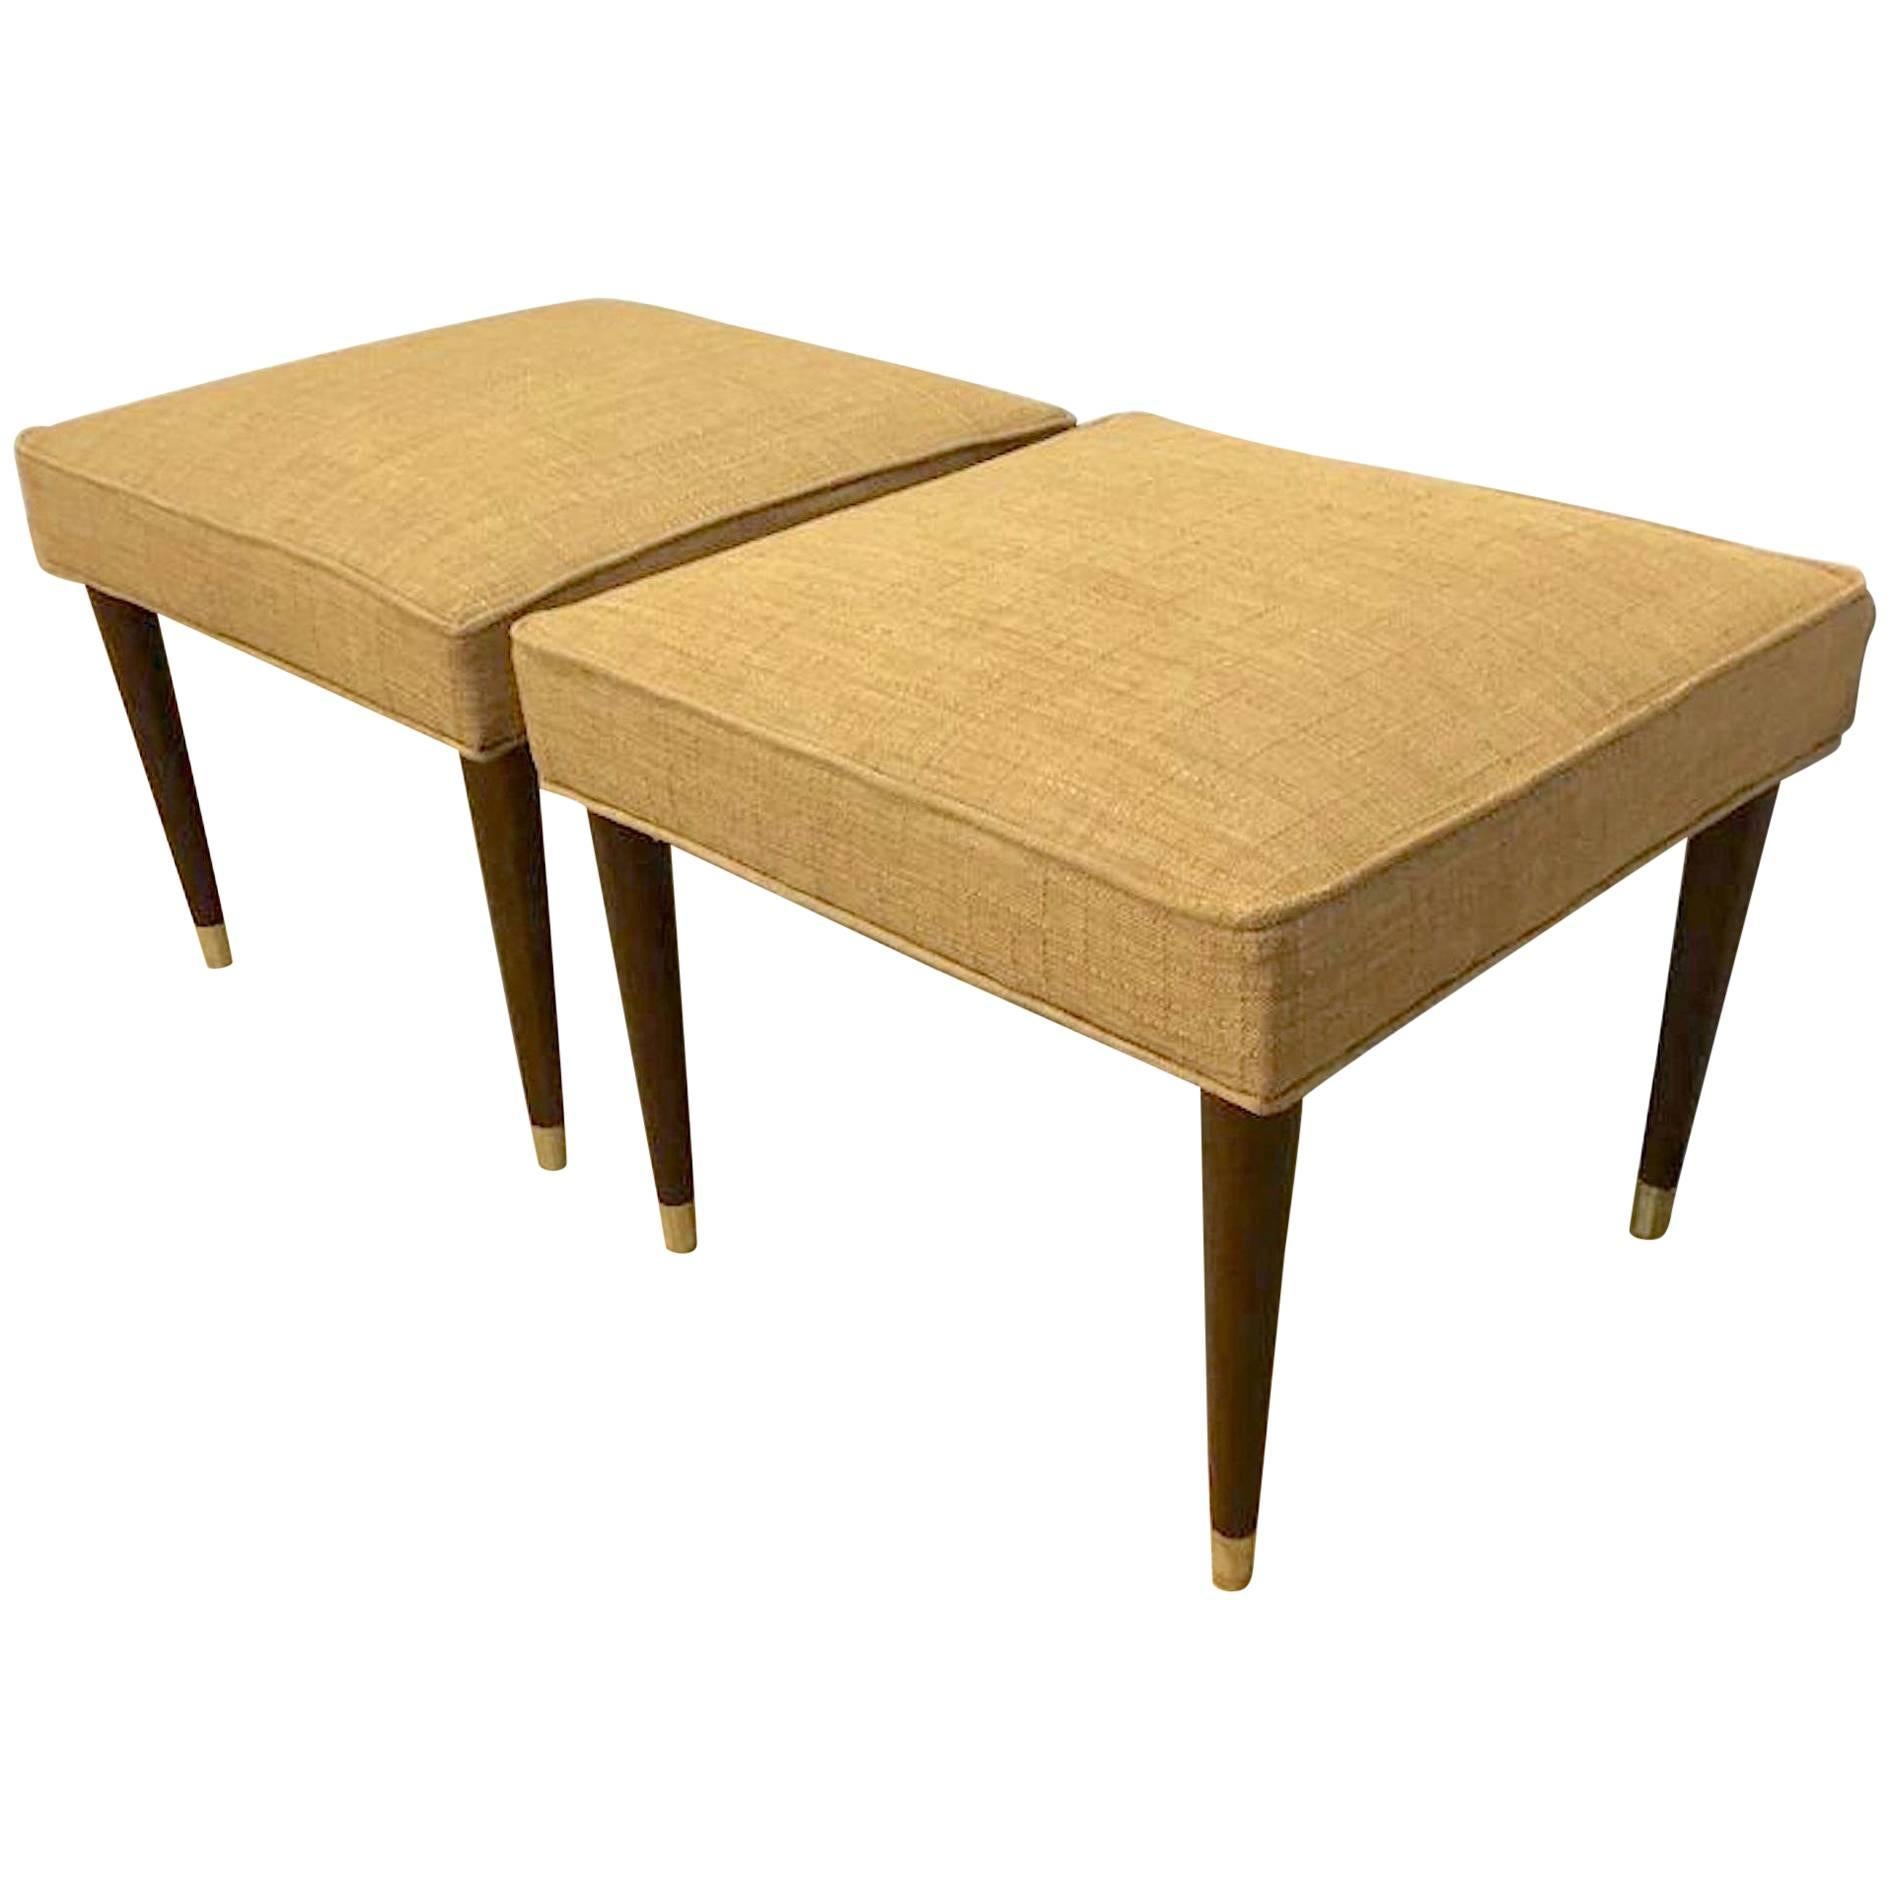 Pair of Midcentury Italian Square Benches For Sale